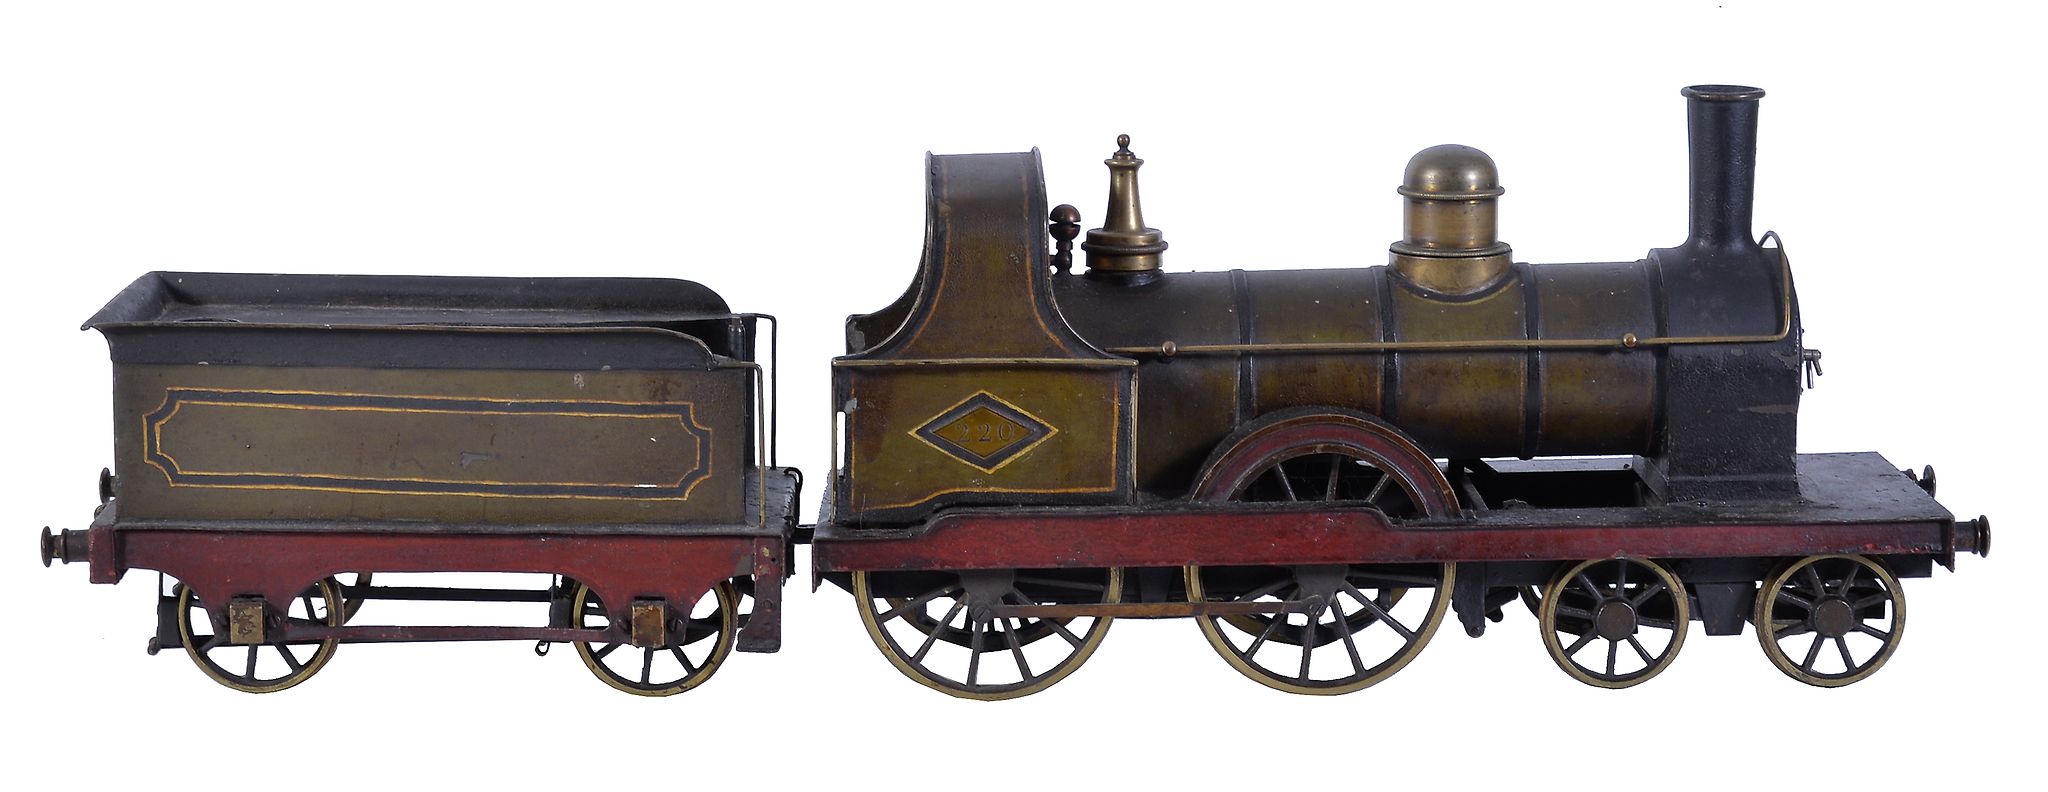 A rare 3 Â½ inch gauge historic model of a live steam 4-4-0 tender locomotive No 222, the multi- - Image 2 of 4